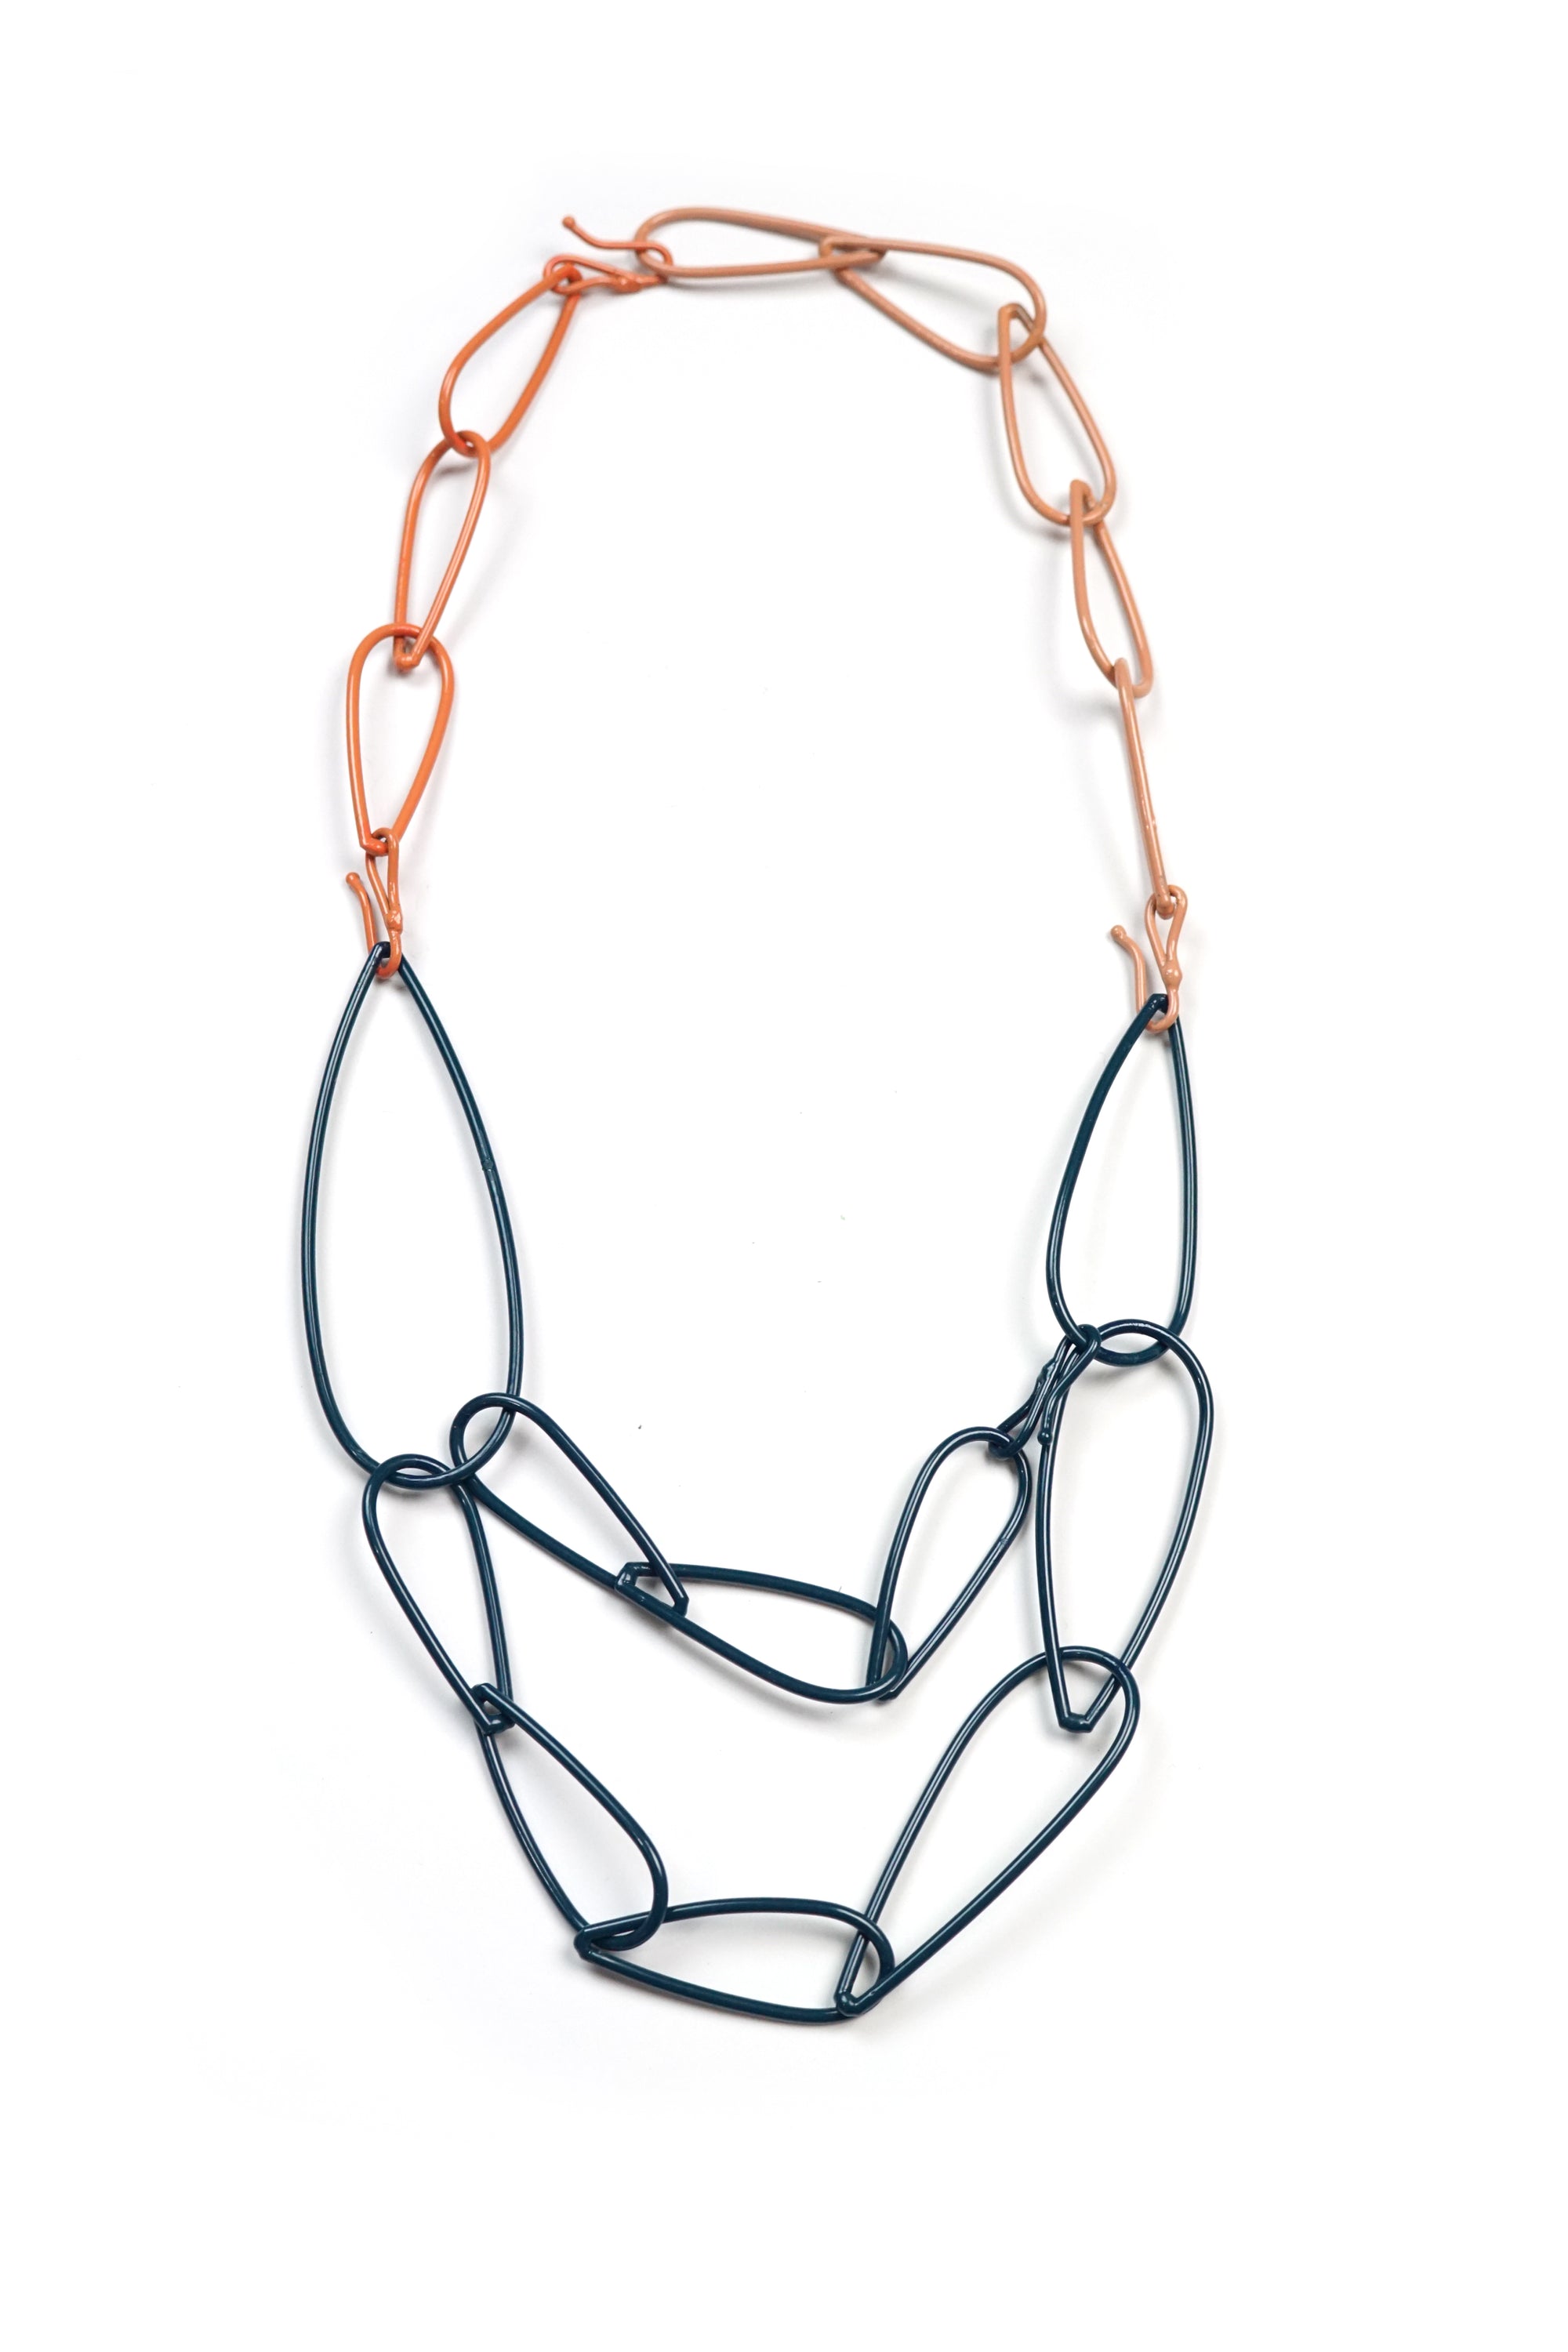 Modular Necklace in Deep Ocean, Desert Coral, and Dusty Rose